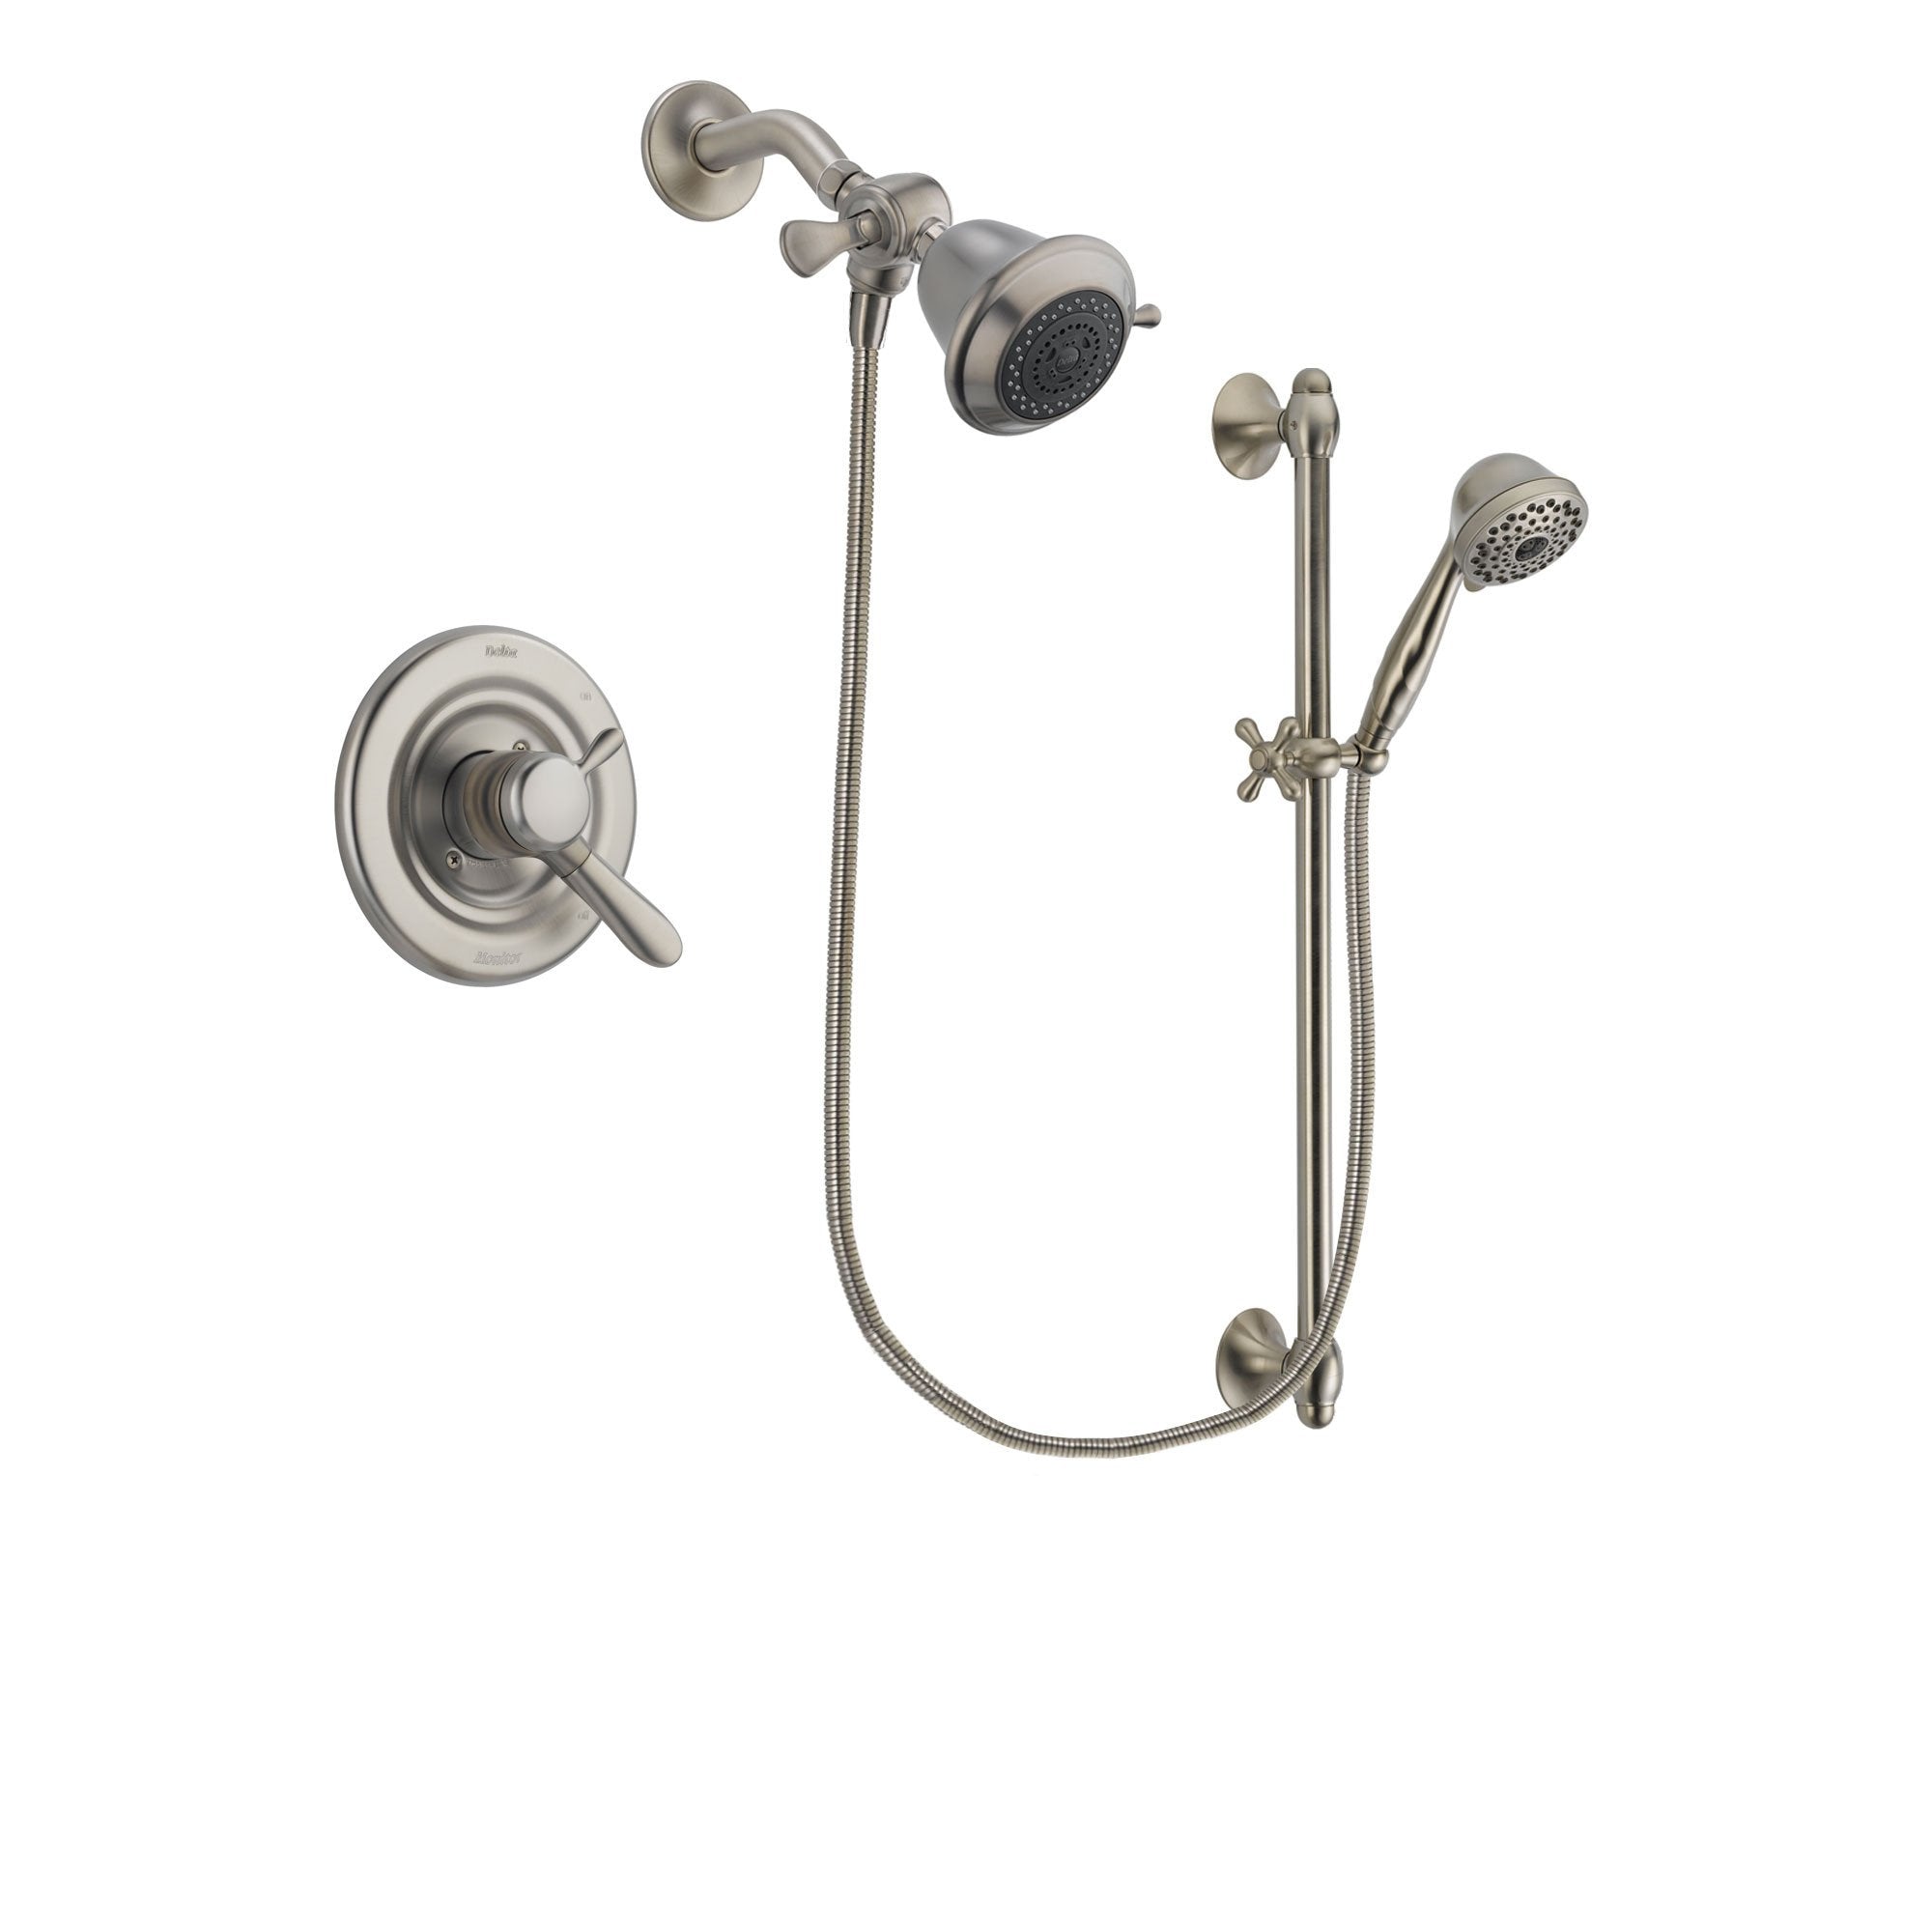 Delta Lahara Stainless Steel Finish Dual Control Shower Faucet System Package with Shower Head and 7-Spray Handheld Shower with Slide Bar Includes Rough-in Valve DSP1670V